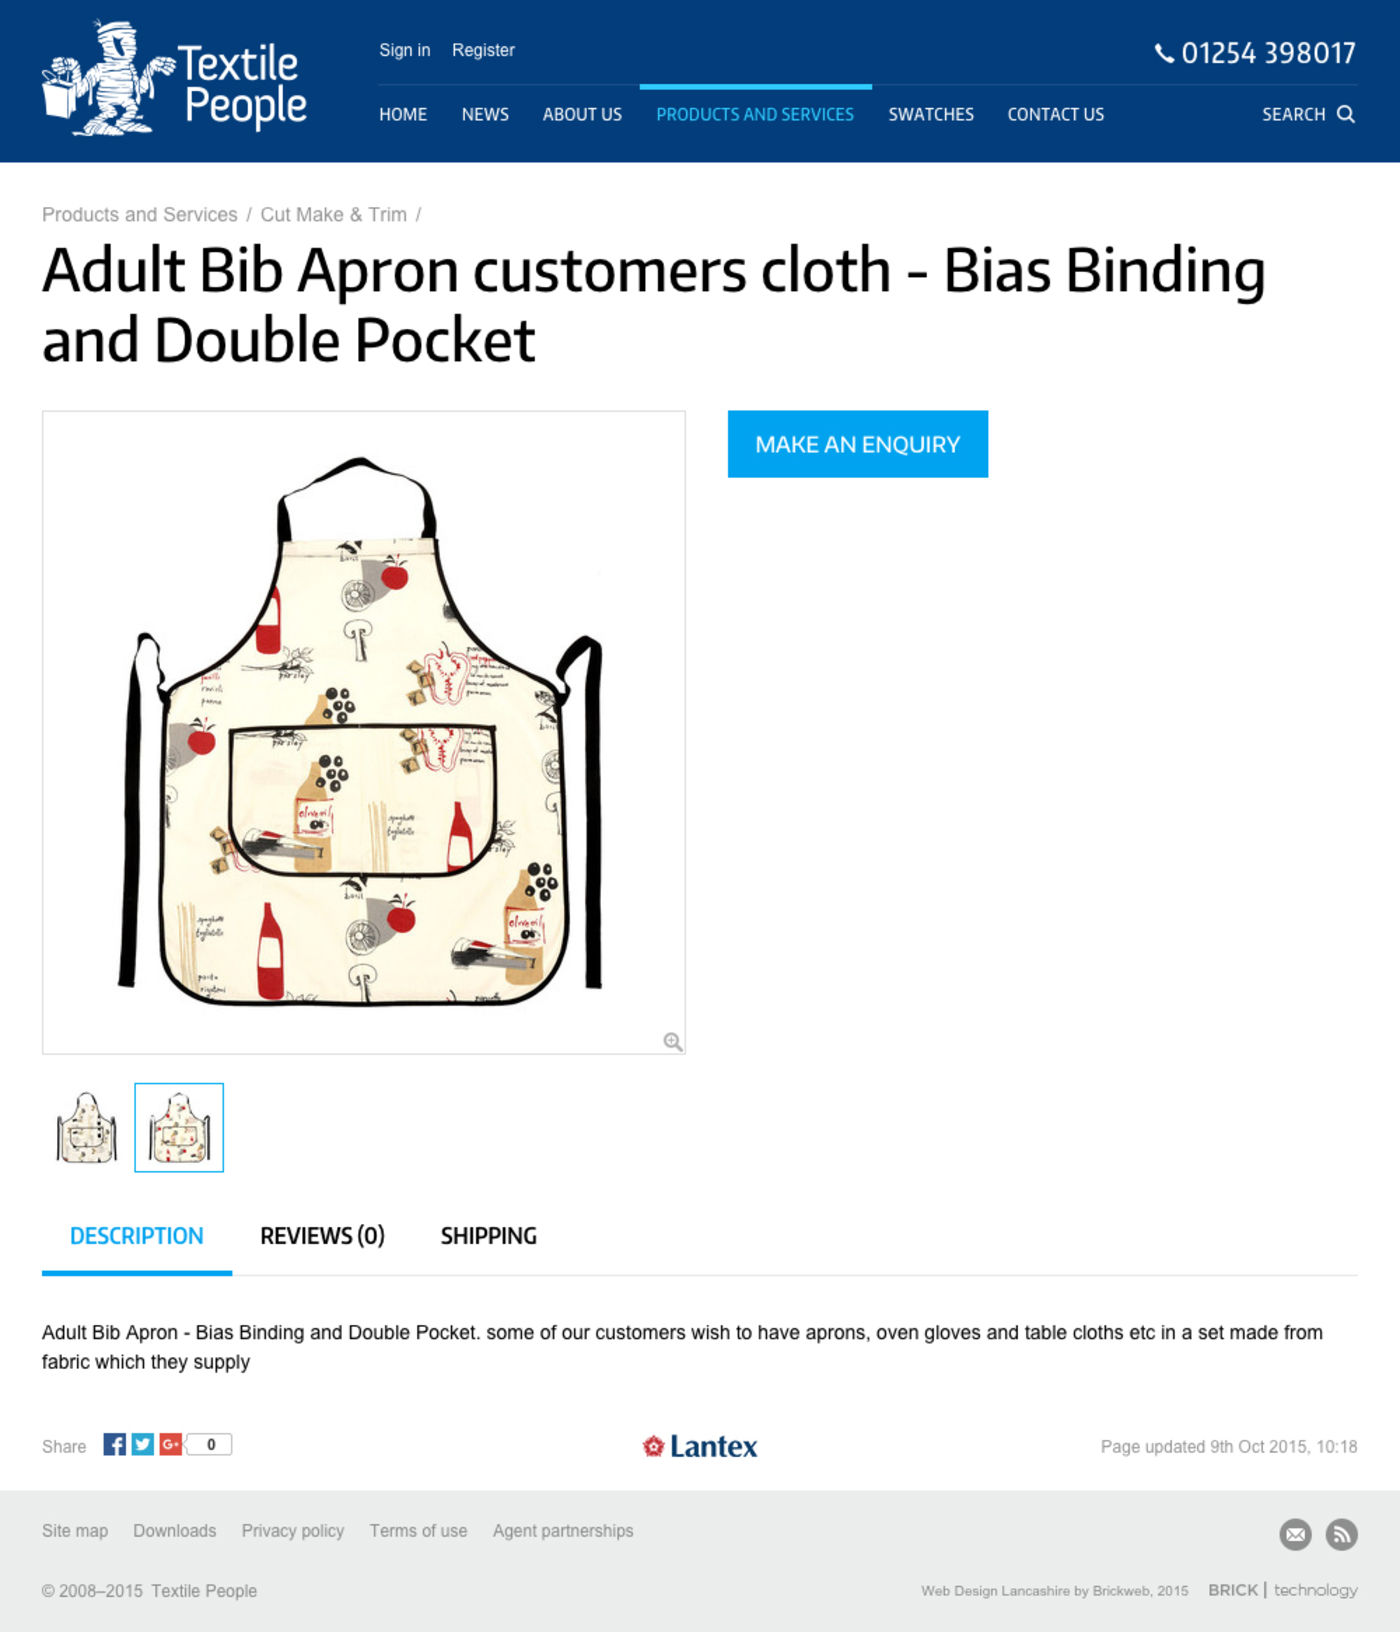 Textile People Product Apron